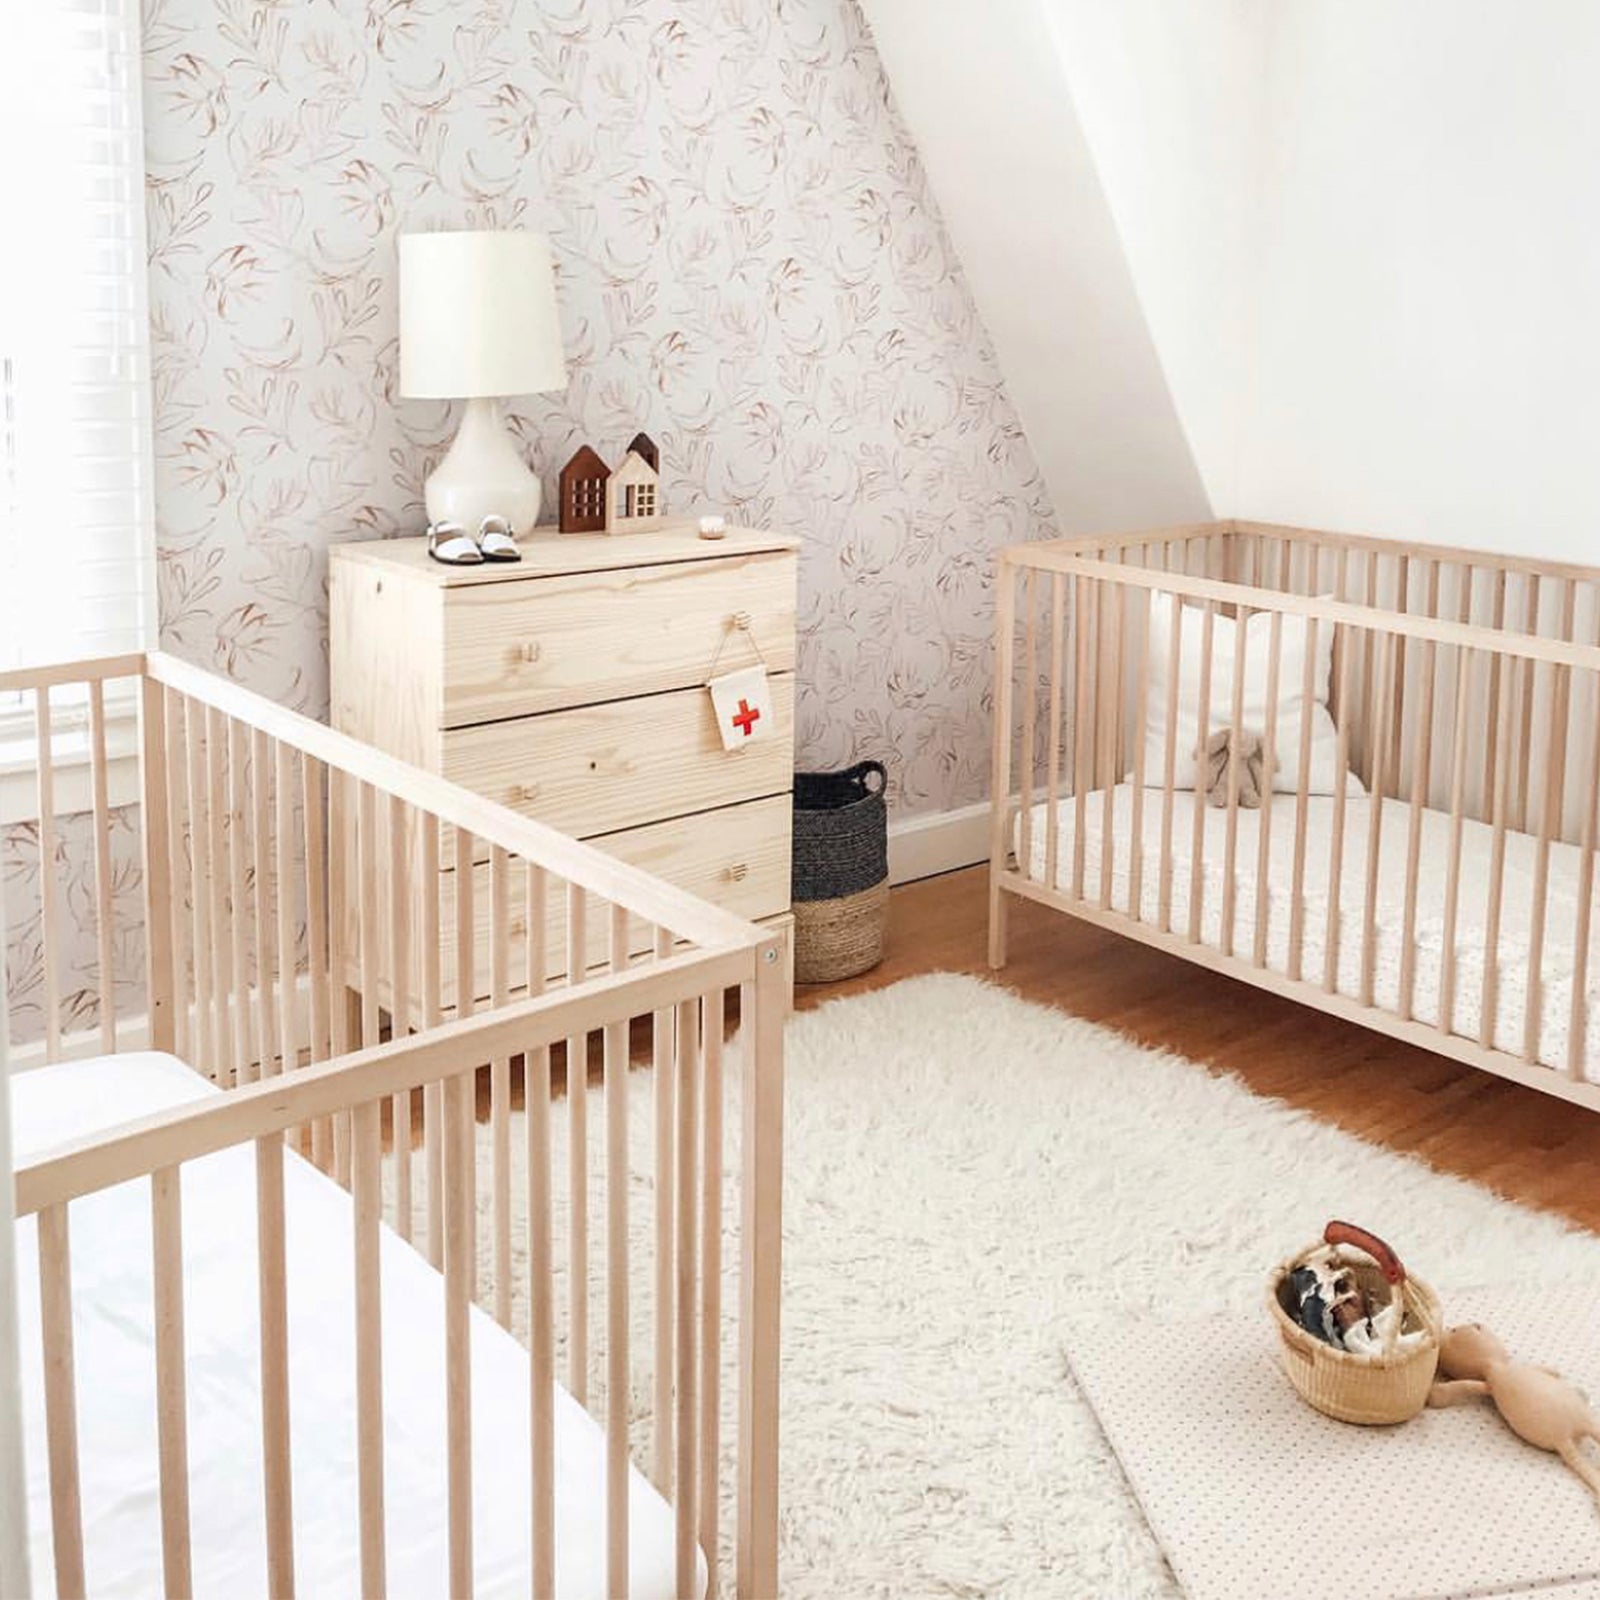 Two wooden cribs with white sheets in a bedroom 